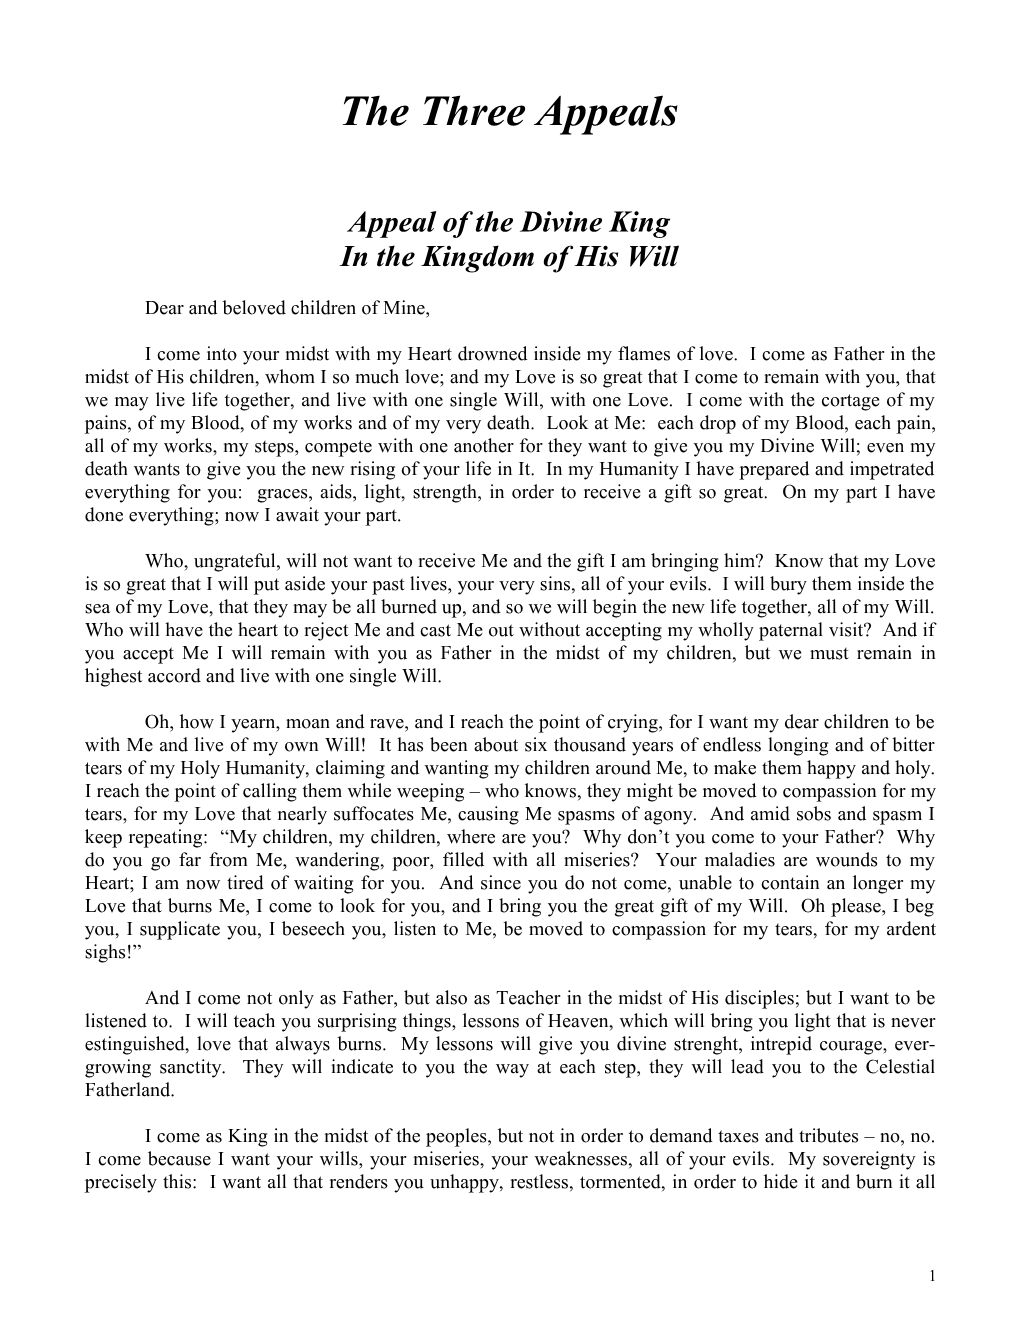 Appeal of the Divine King